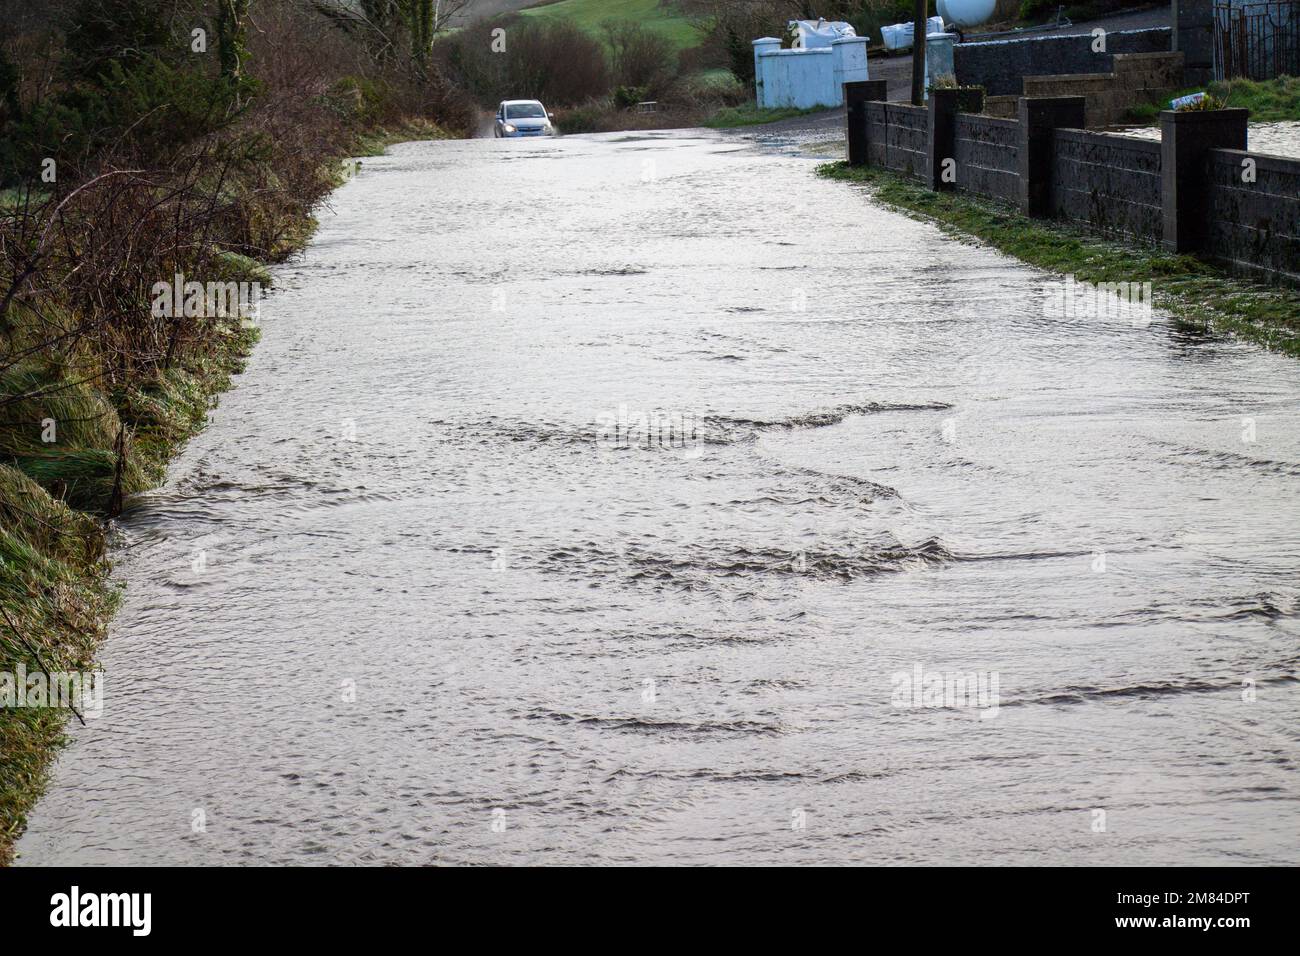 Road covered in winter flood waters Stock Photo